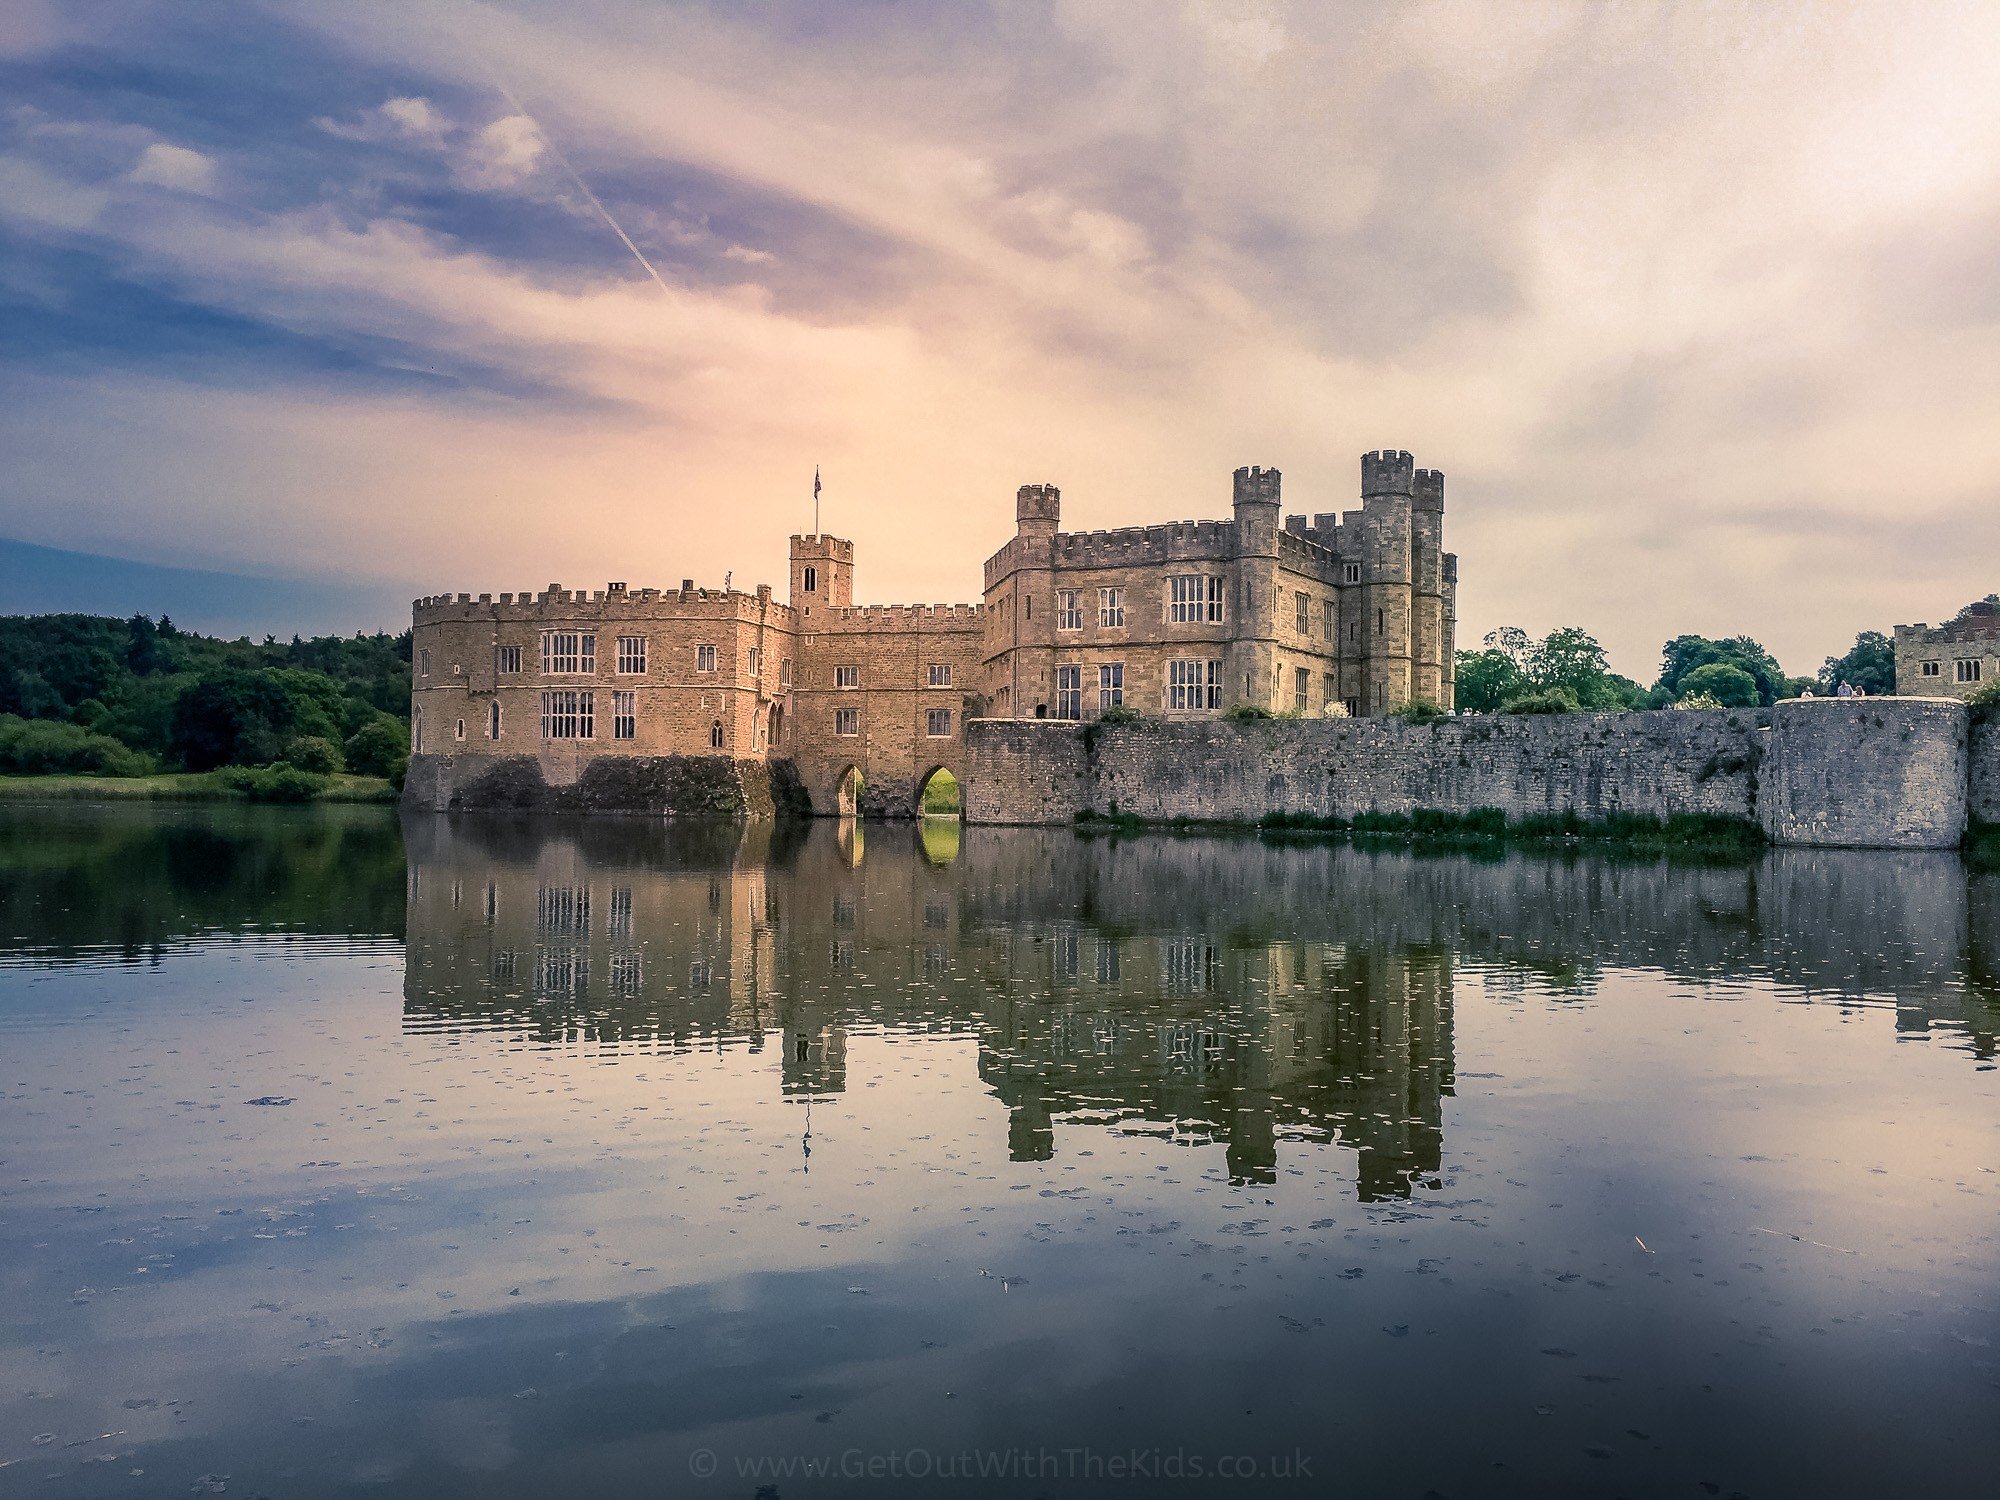  Leeds castle is surrounded by a massive moat.